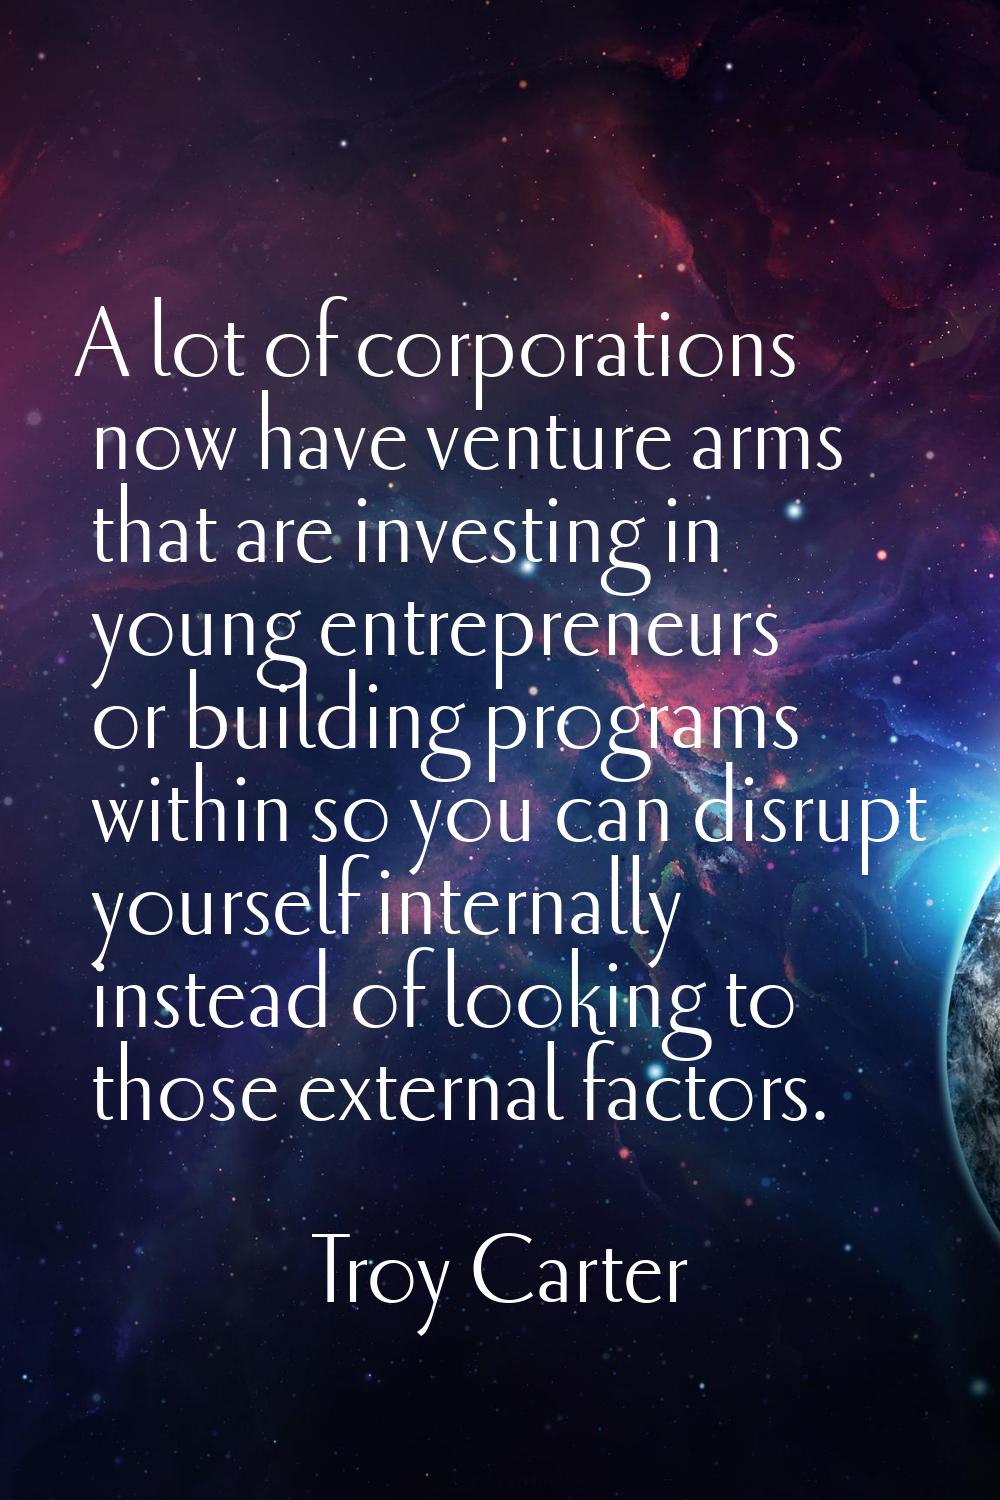 A lot of corporations now have venture arms that are investing in young entrepreneurs or building p